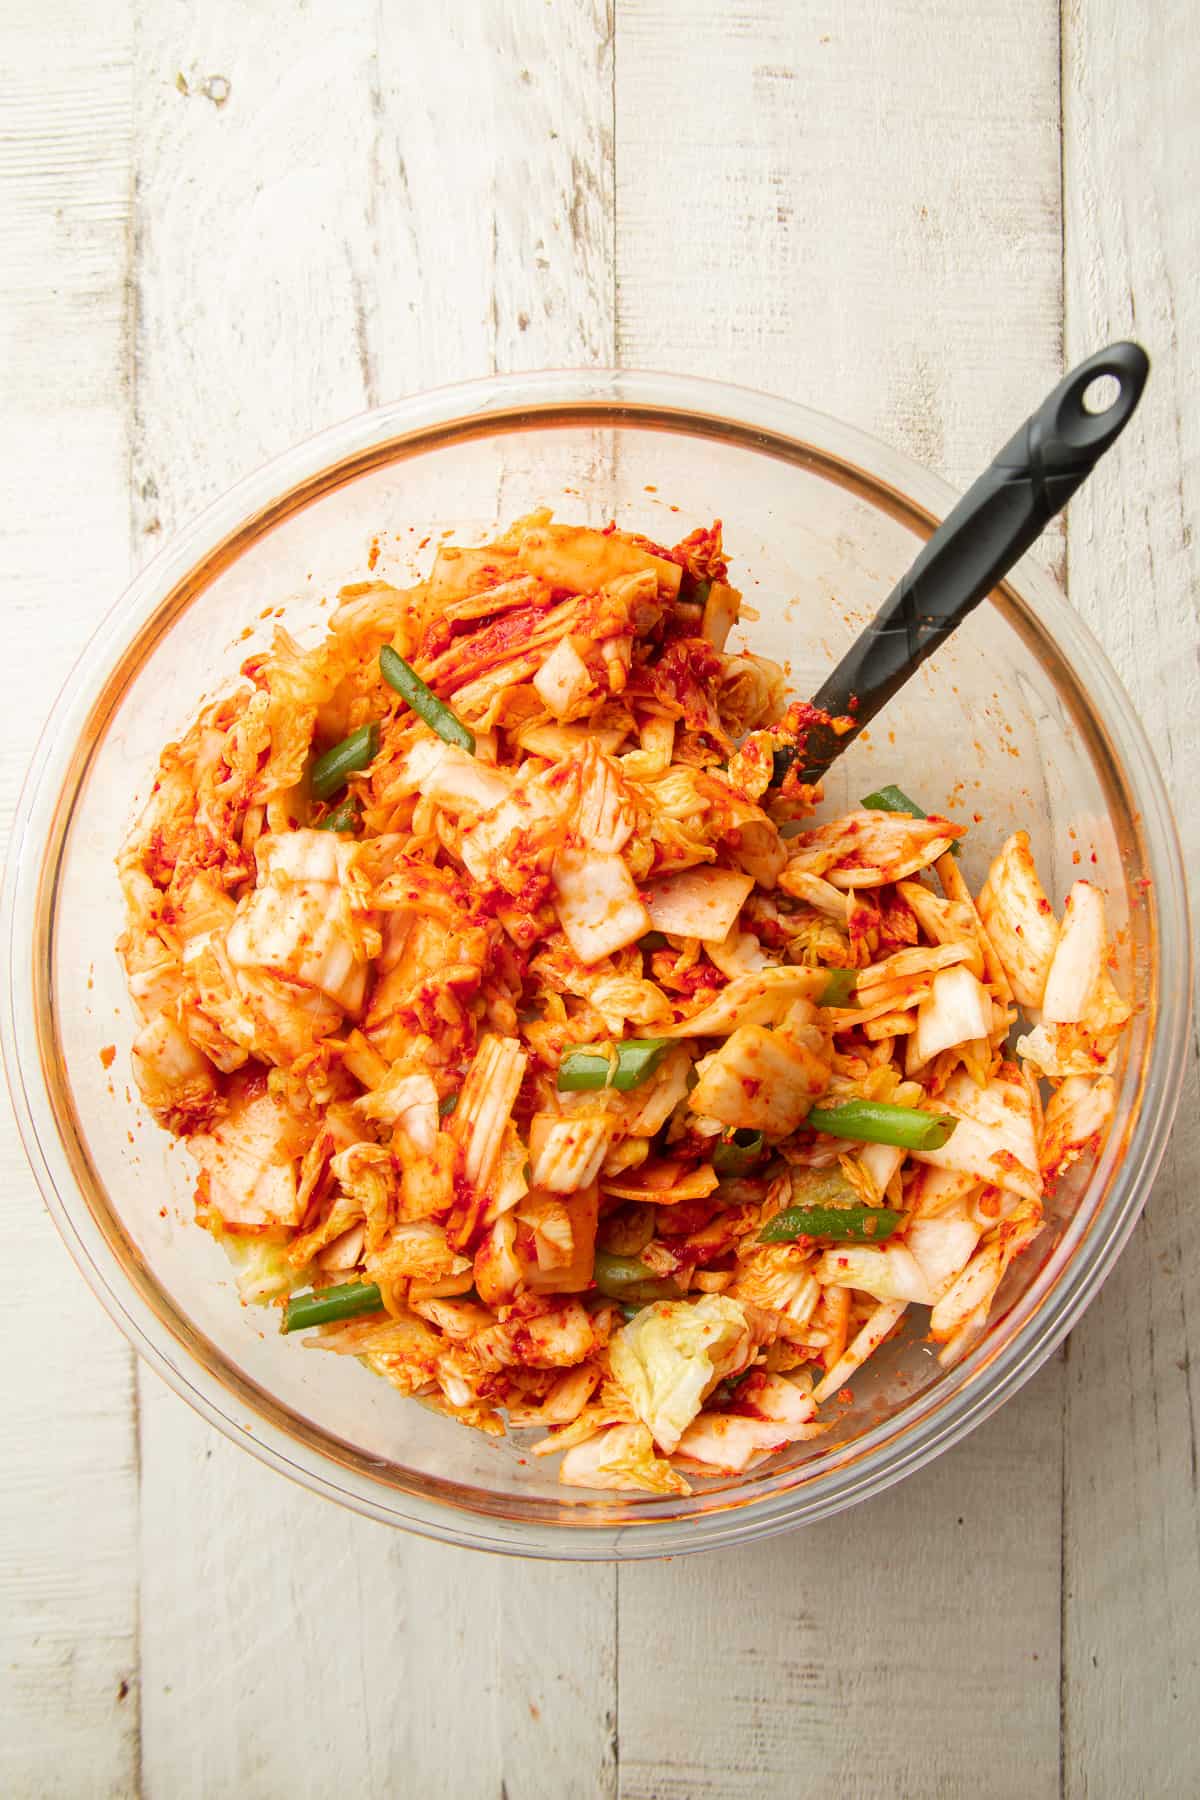 Ingredients for Vegan Kimchi in a glass bowl with spatula.